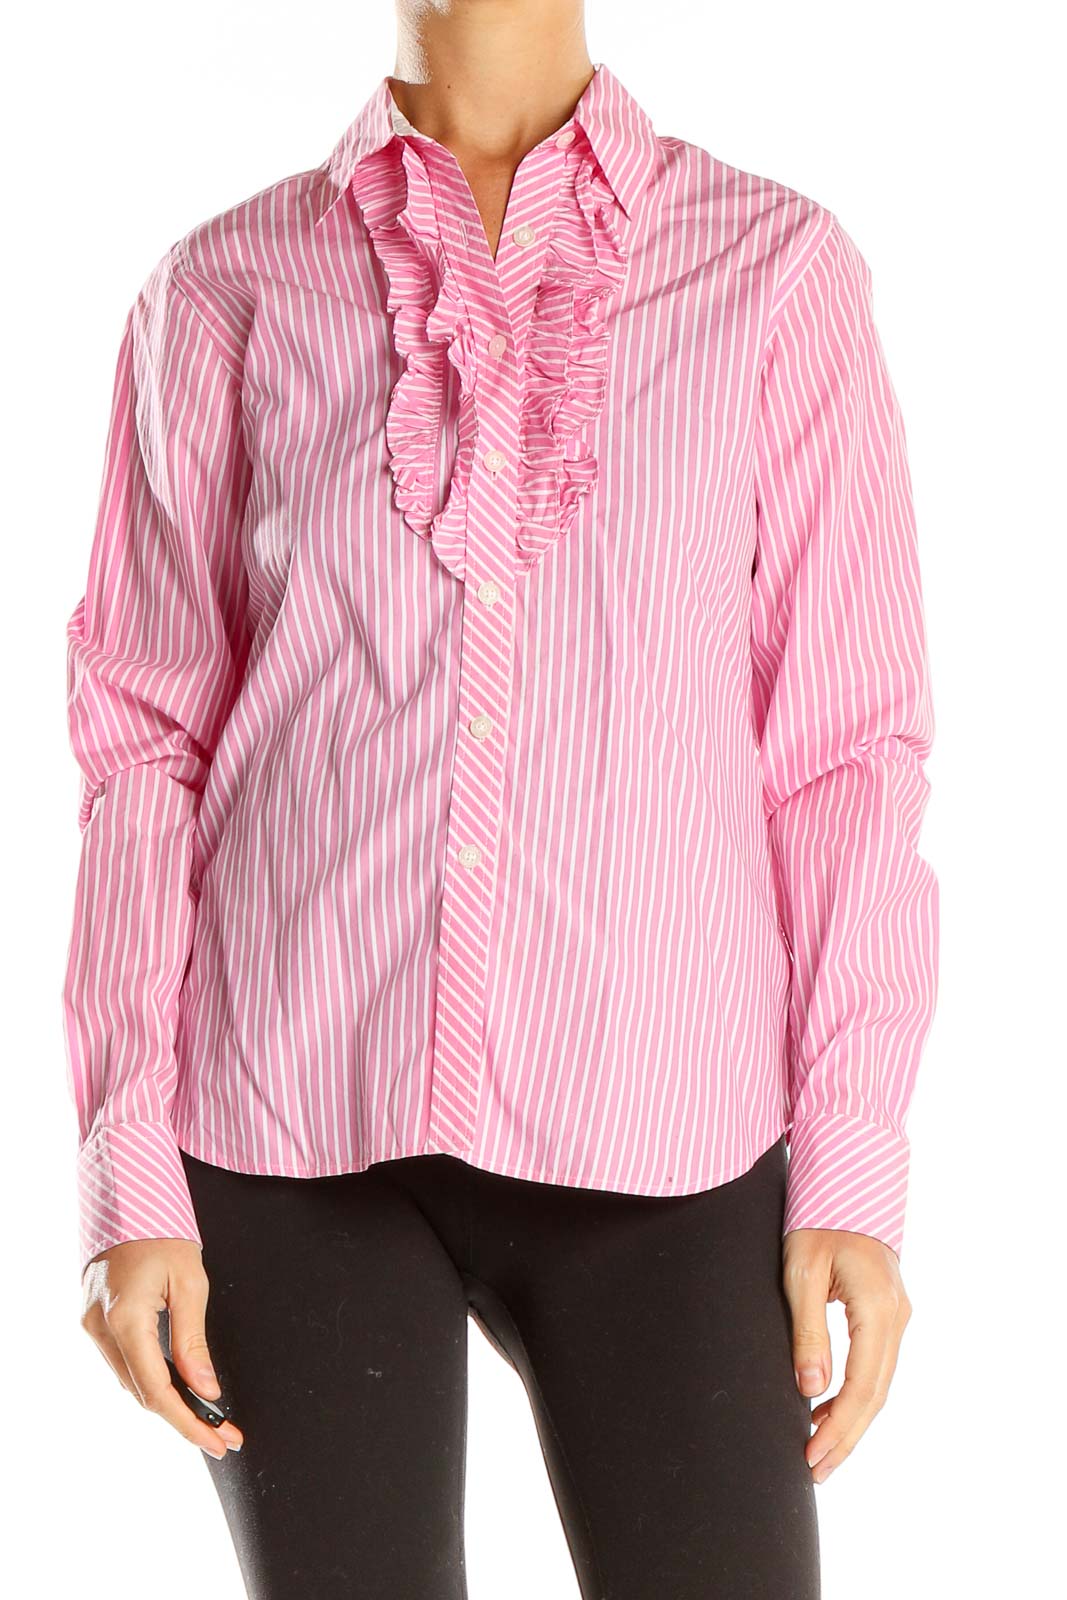 Pink Striped Ruffle Work Top Front